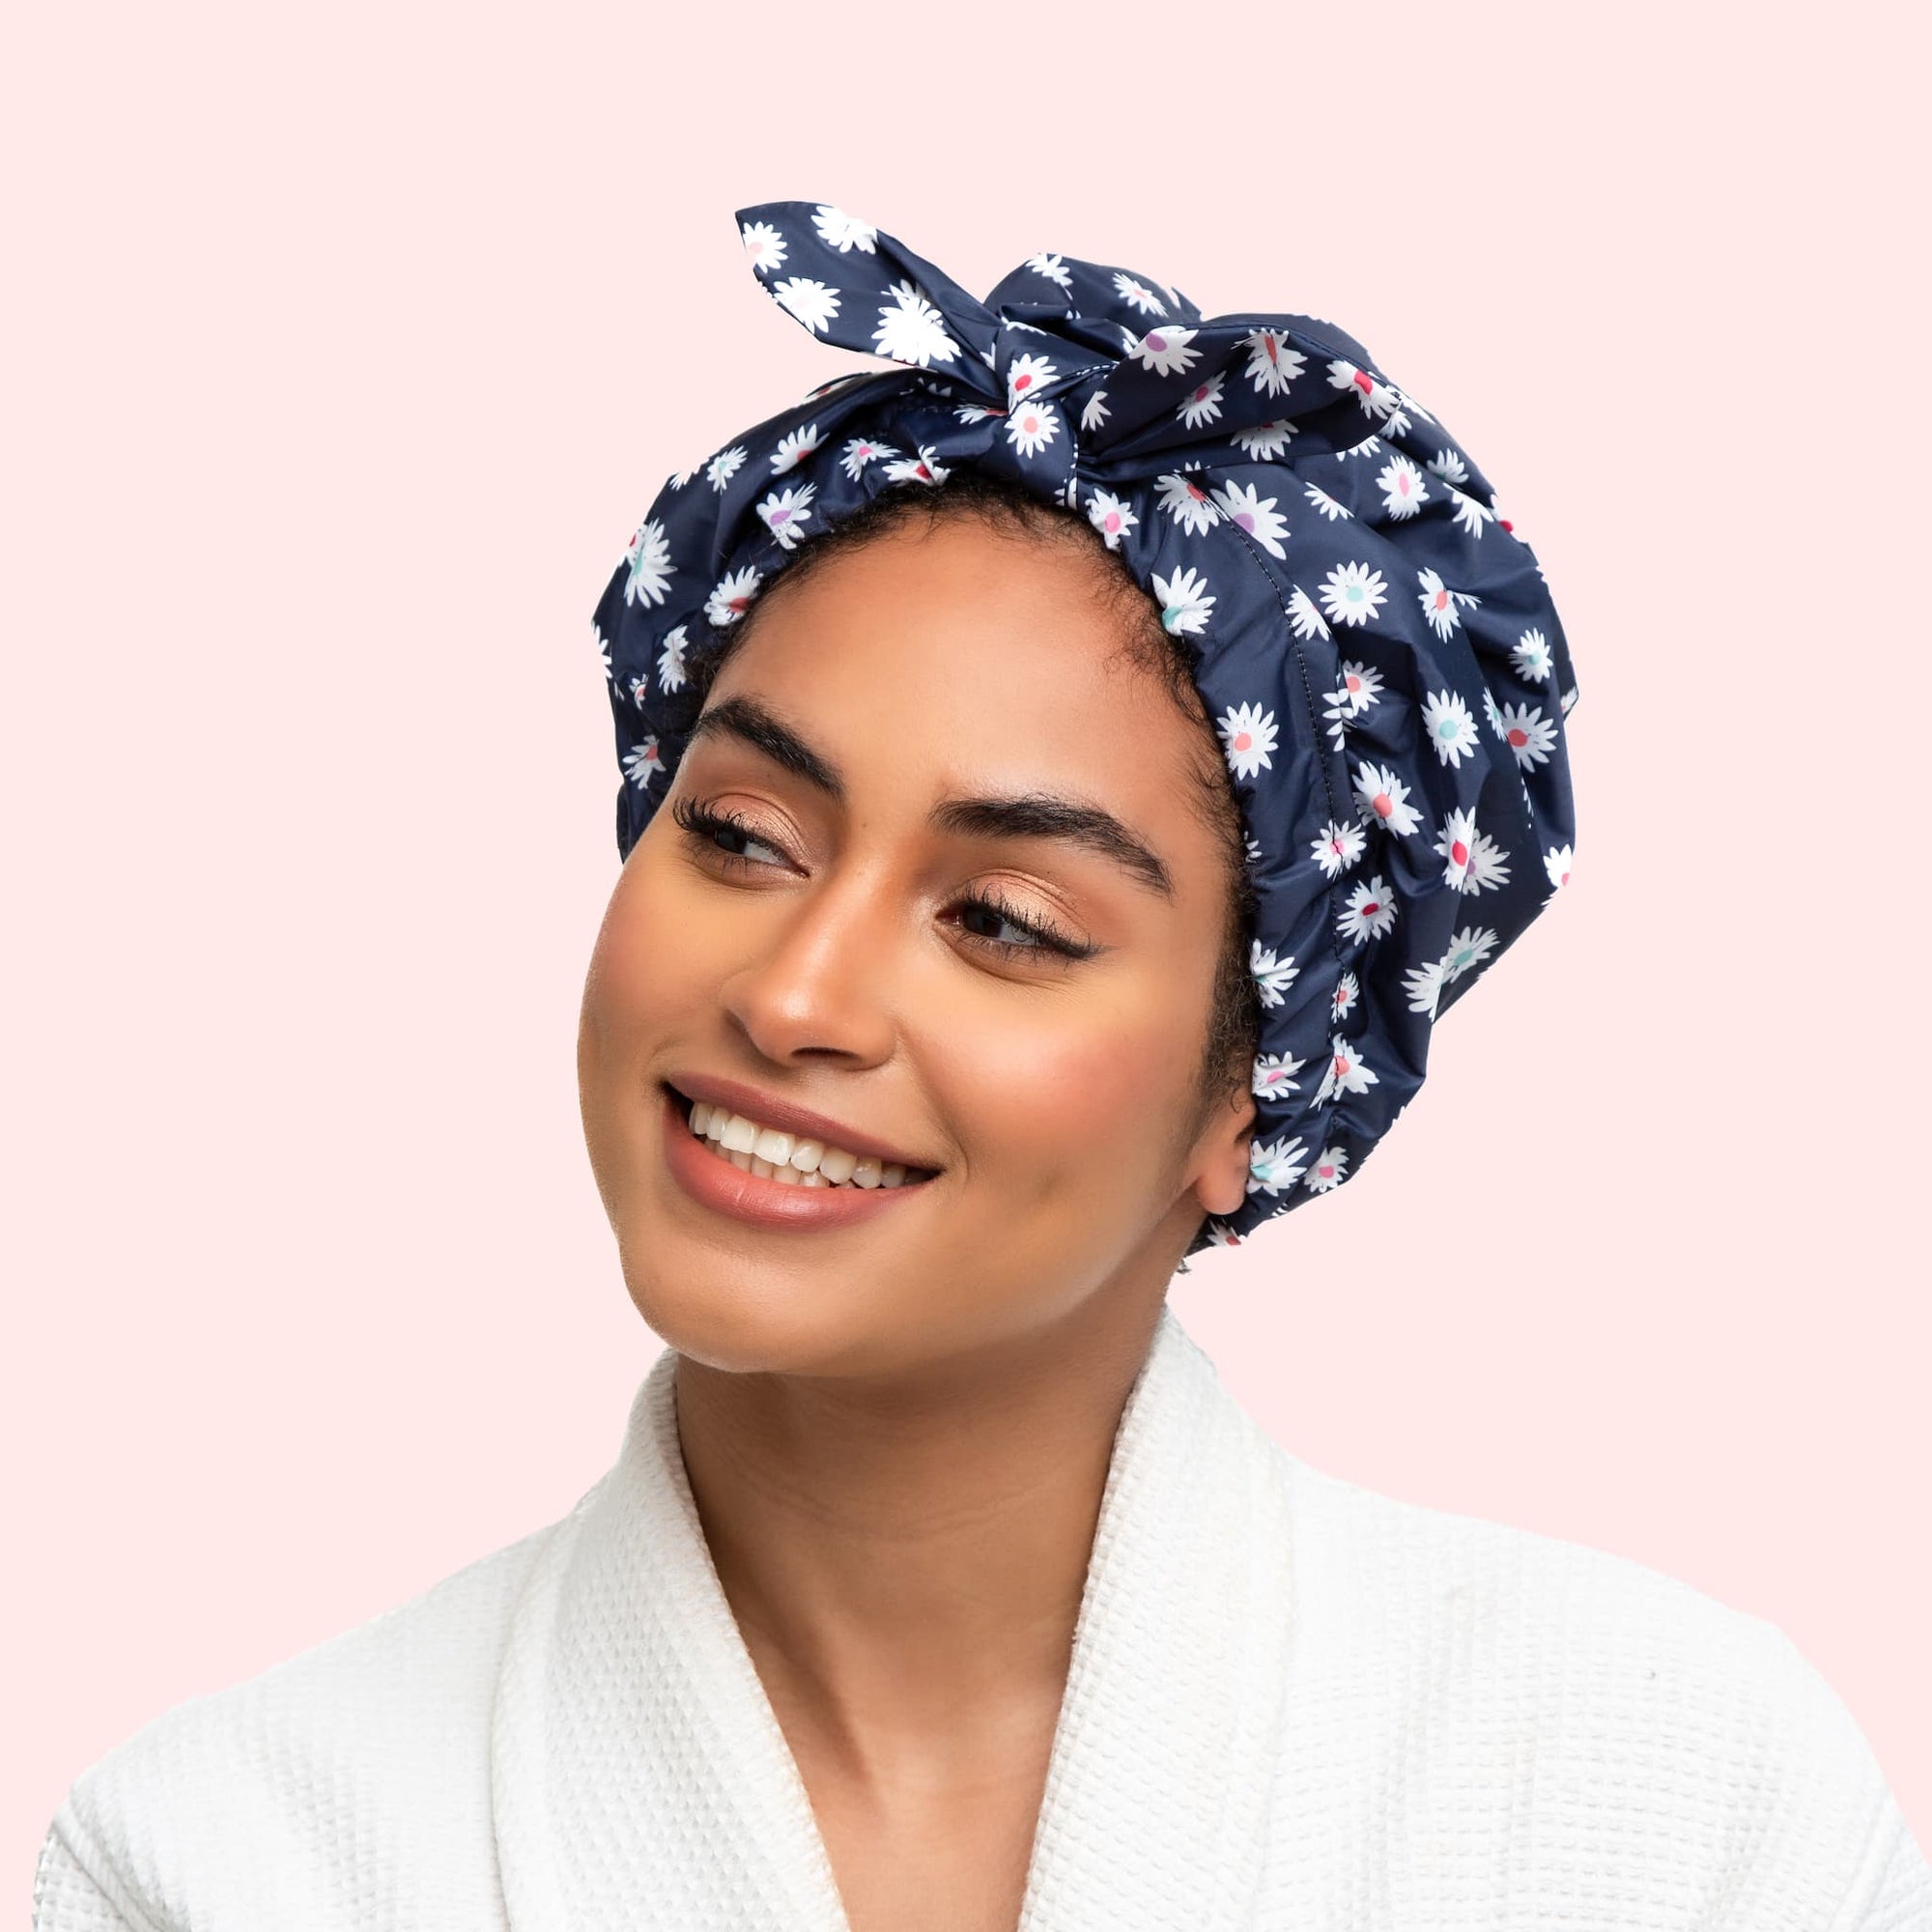 Only Curls Shower Cap - Navy Daisy - Only Curls